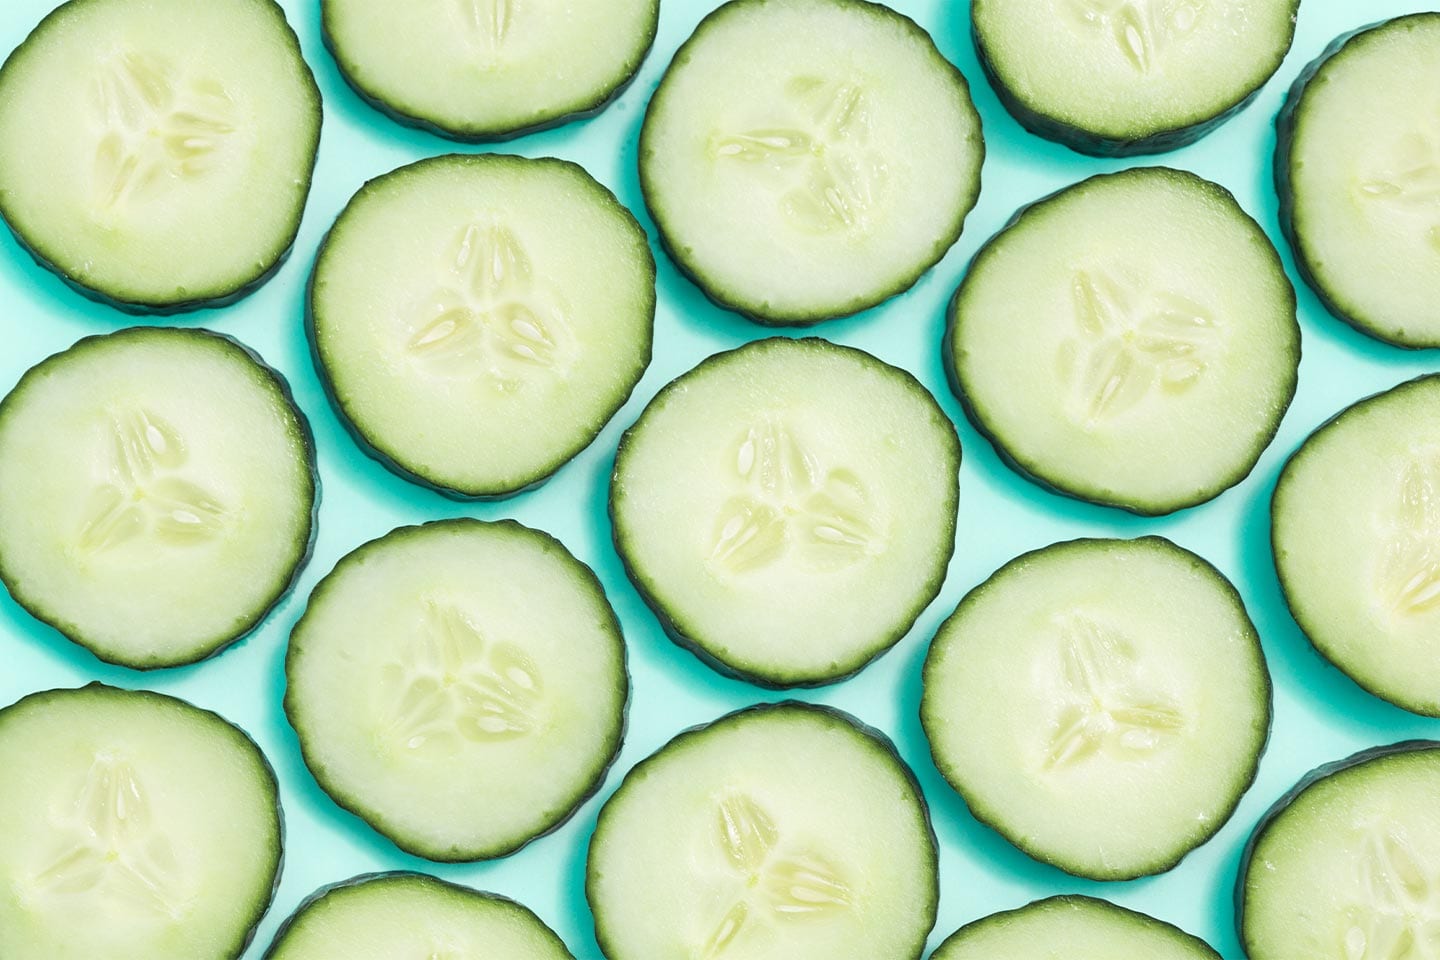 cucumber slices on a mint green background